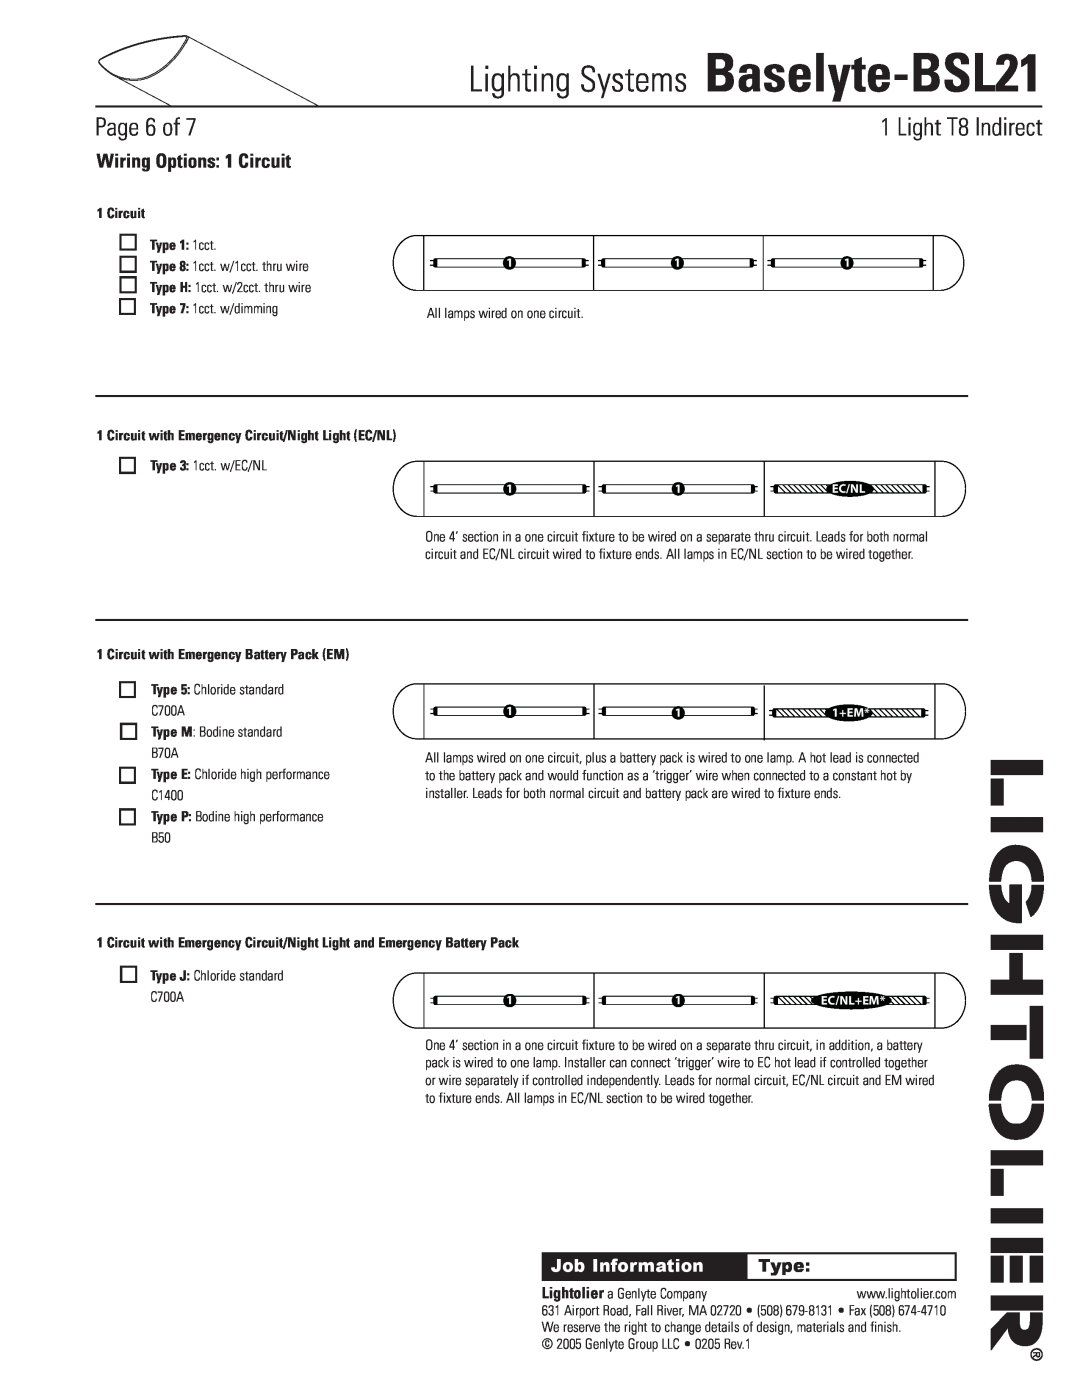 Lightolier Baselyte-BSL21 Wiring Options 1 Circuit, Circuit Type 1 1cct, Circuit with Emergency Battery Pack EM, Page of 